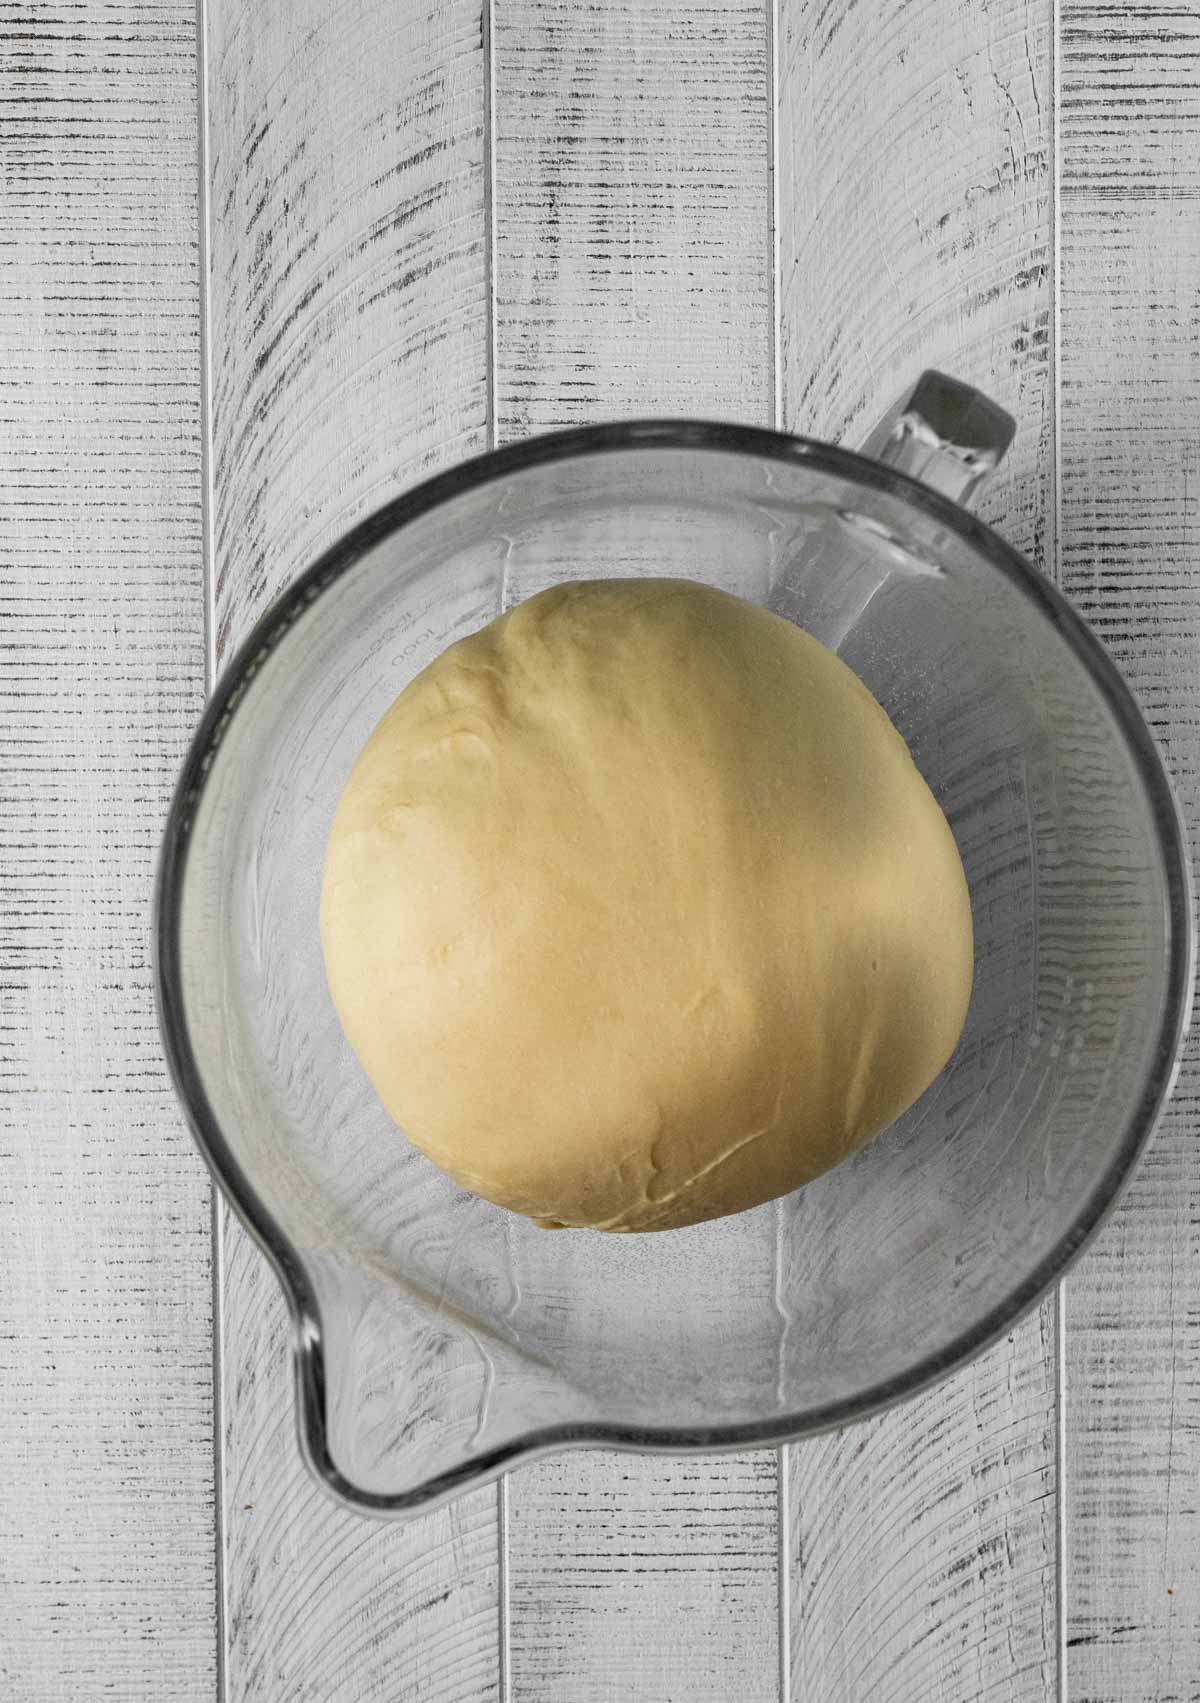 proofed dough ball in bowl